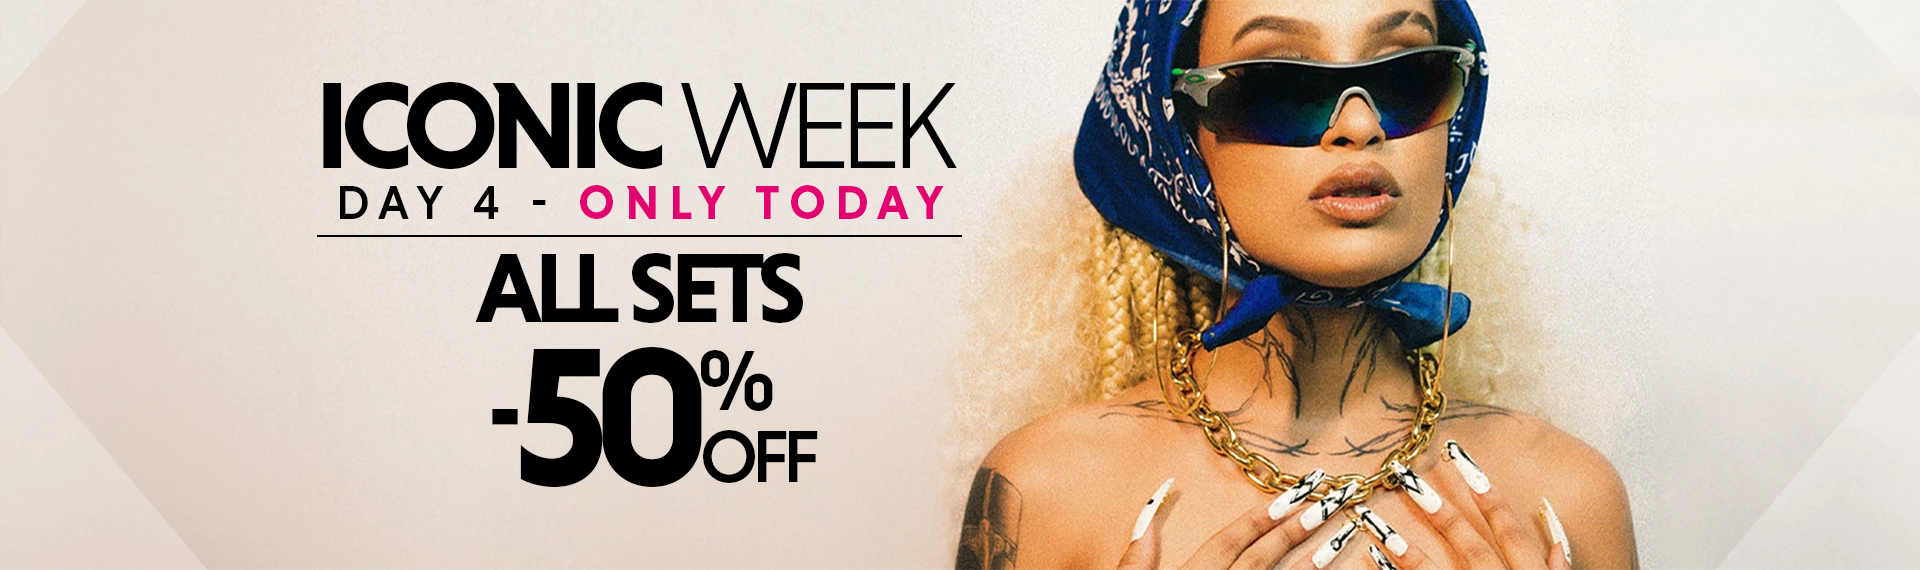 ICONIC WEEK DAY 4 - ALL SETS -50% OFF